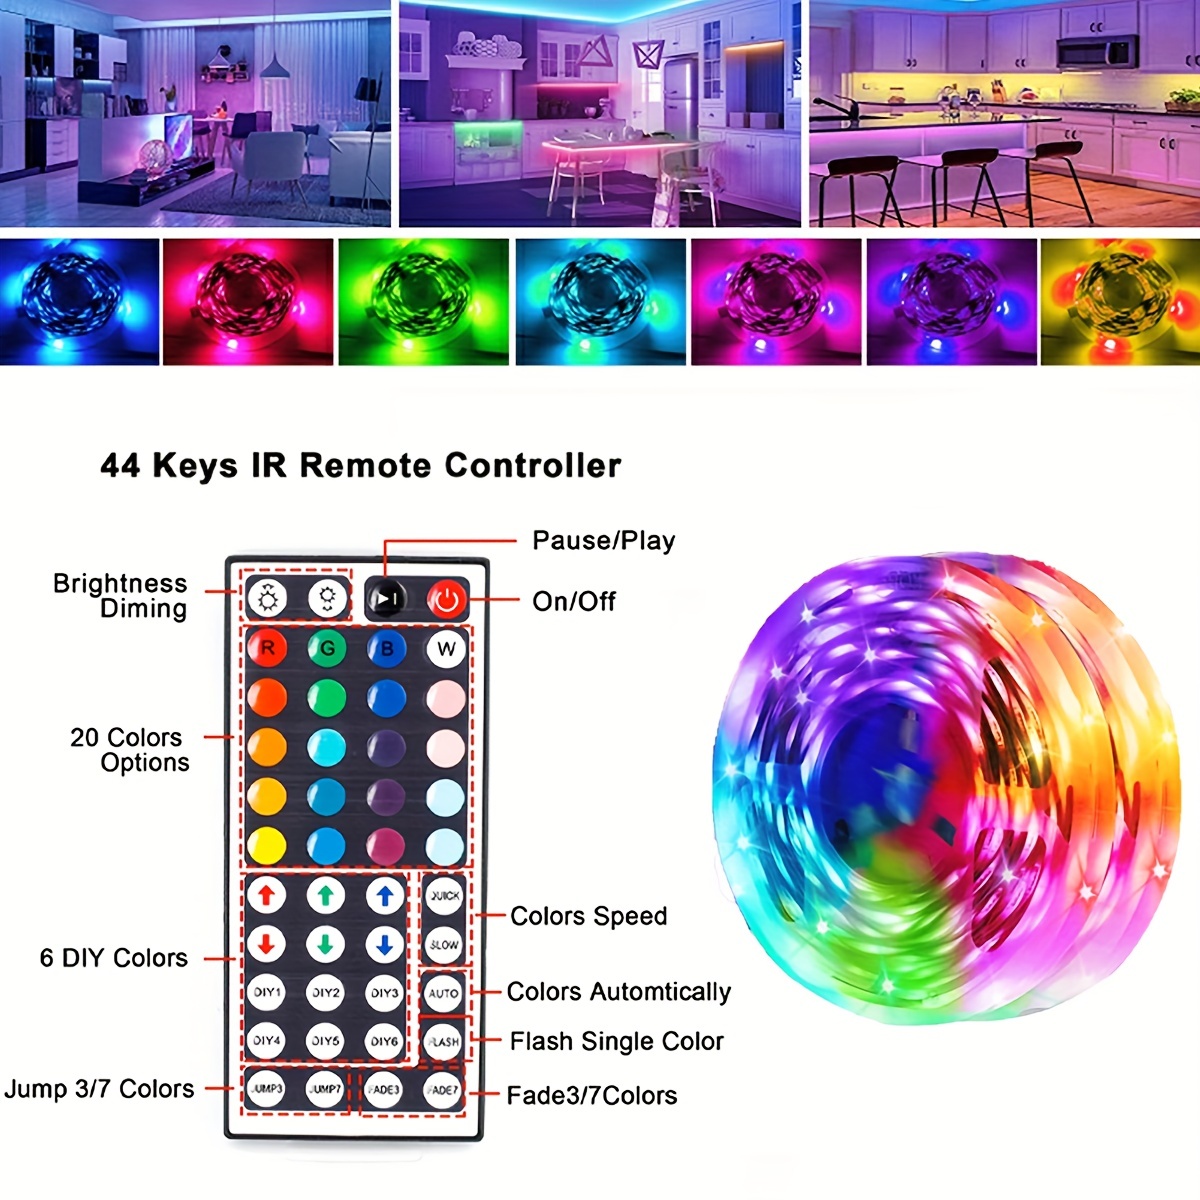 How RGB LEDs work and how to control color